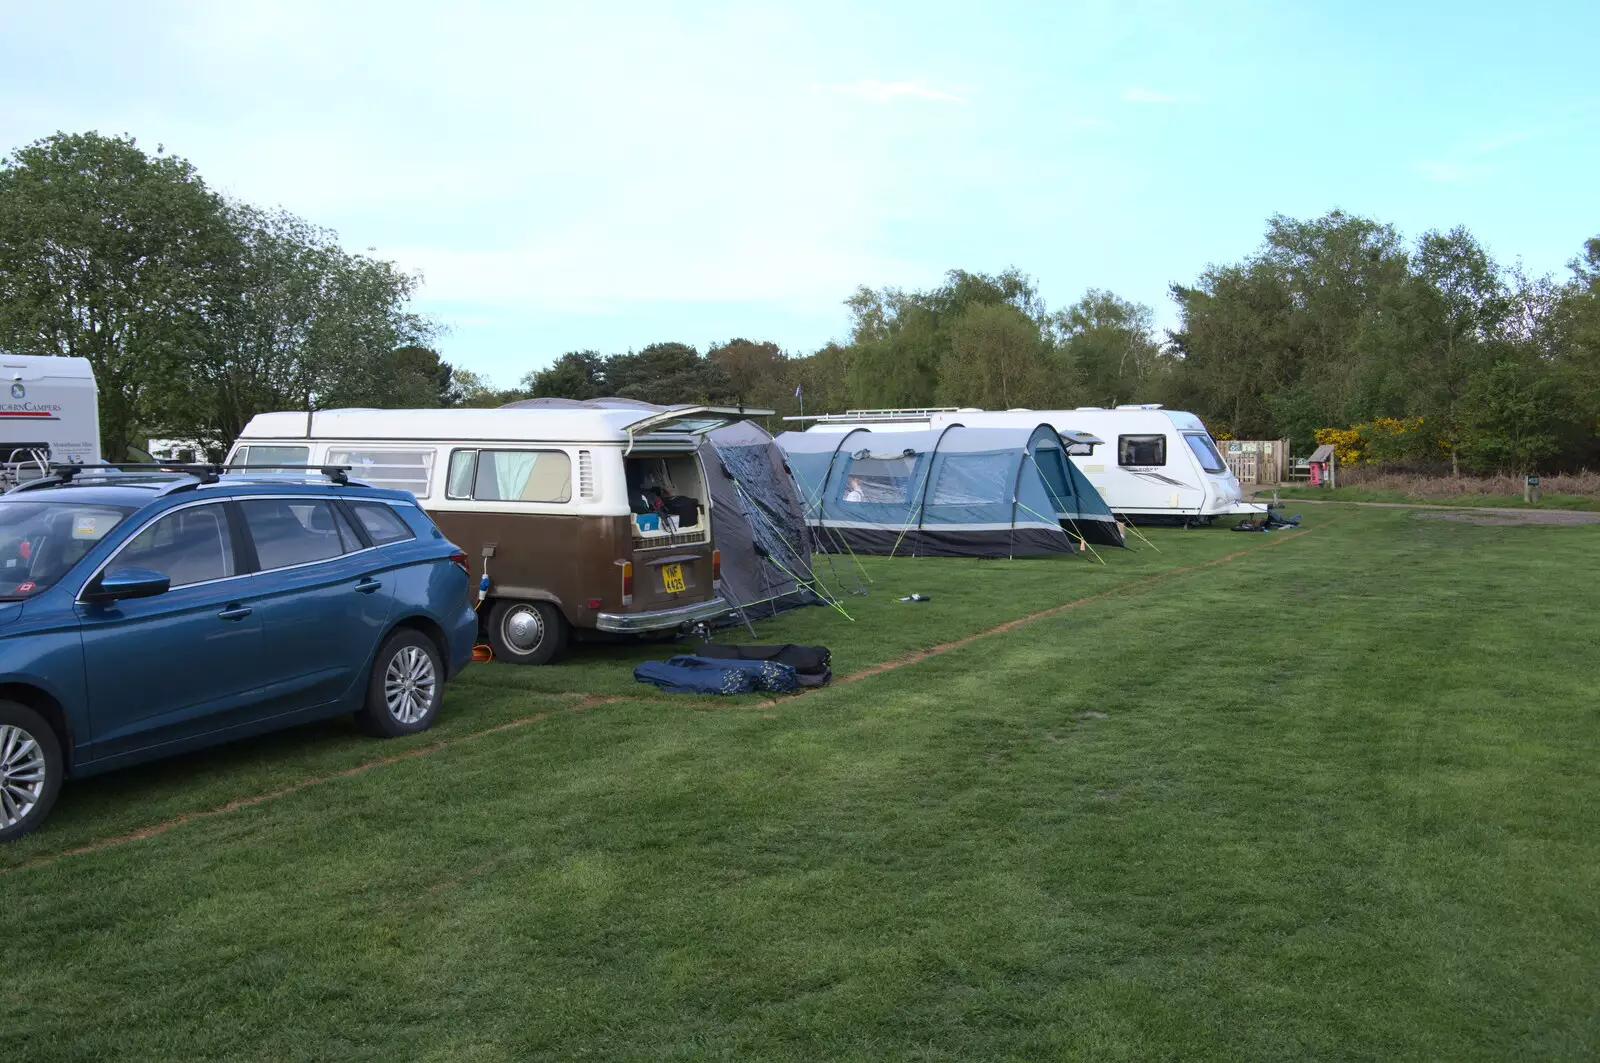 The others have all pitched up, from A Coronation Camping Picnic, Kelling Heath, Norfolk - 6th May 2023